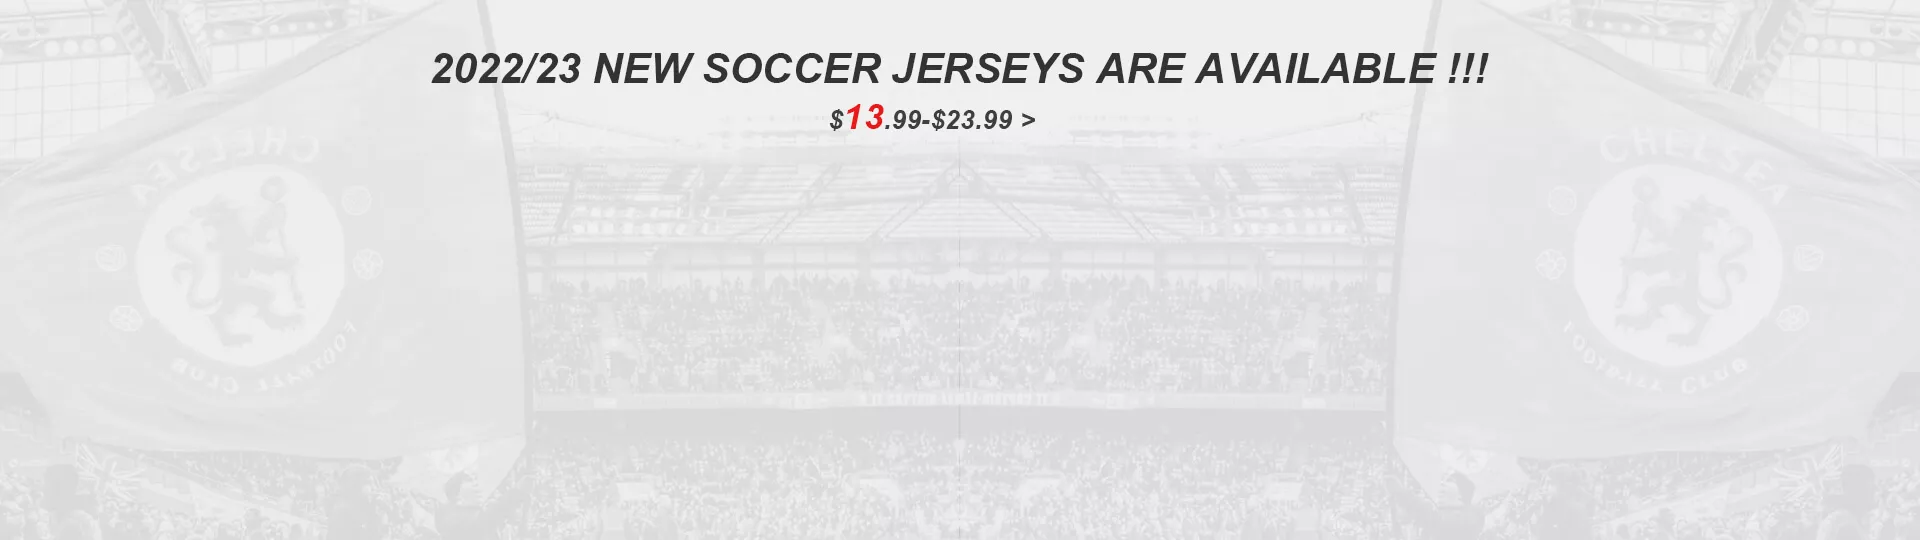 2022/23 NEW SOCCER JERSEYS ARE AVAILABLE - bestsoccerstore